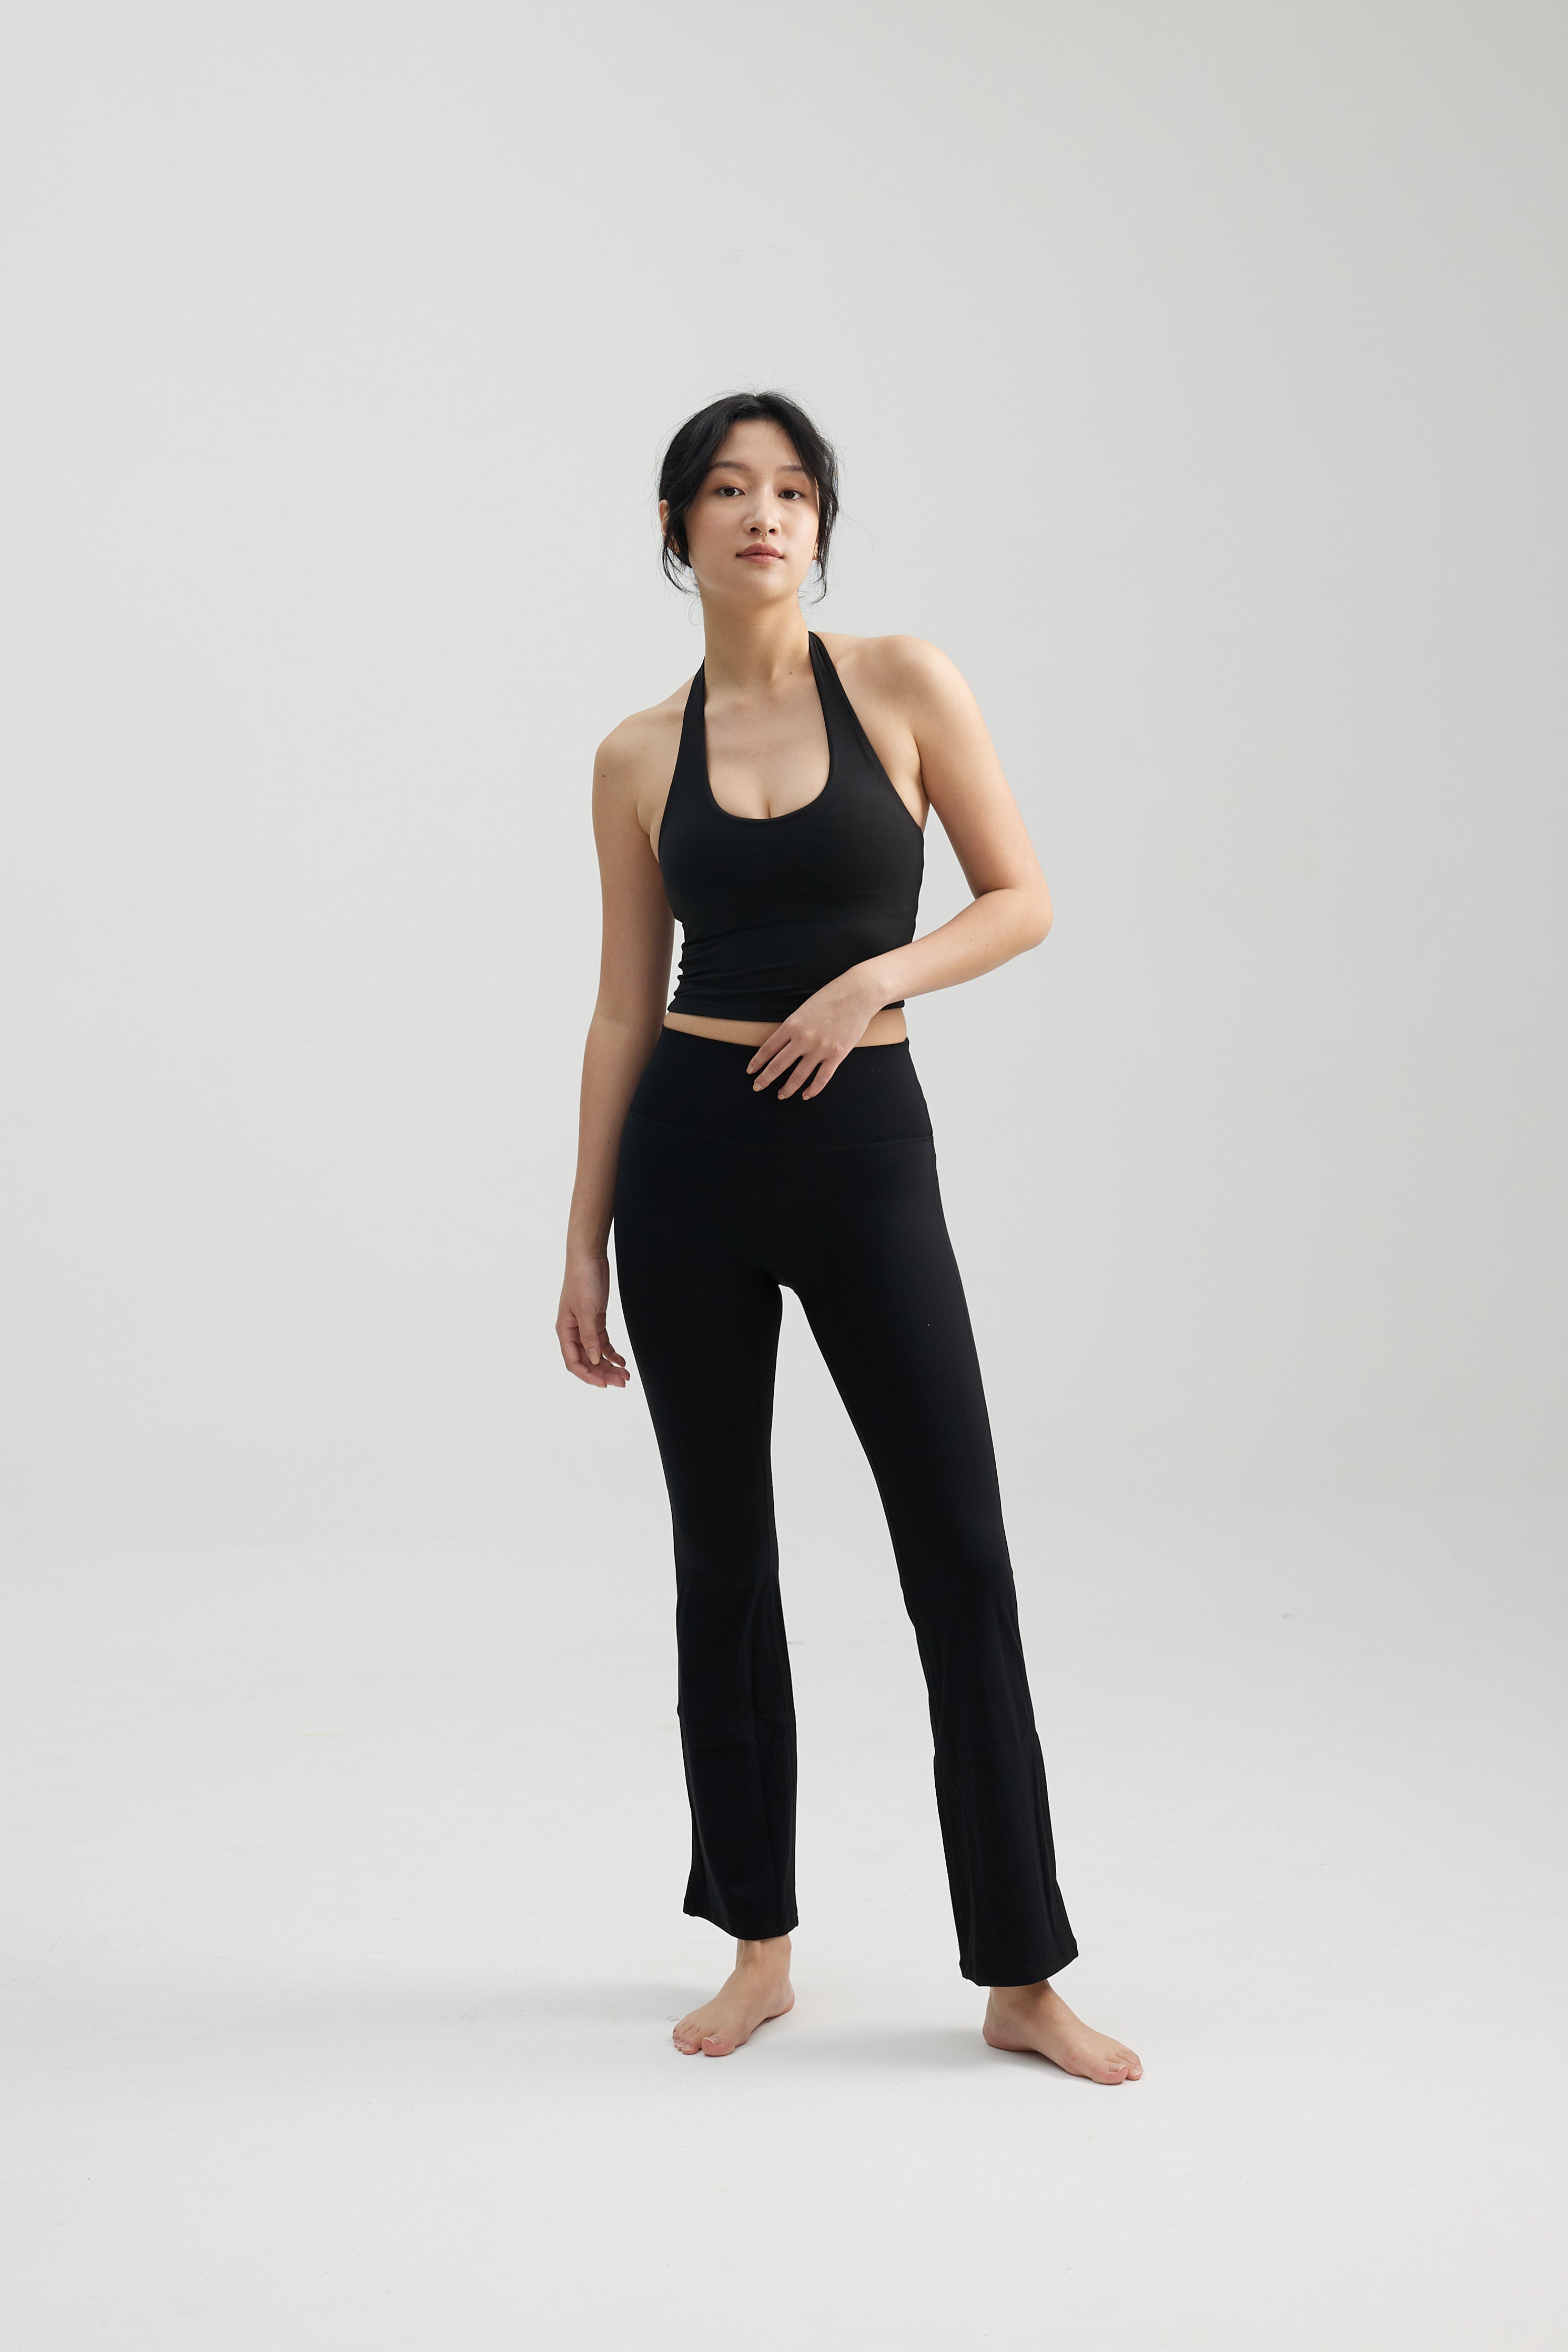 Yoga And Activewear Stores: Where To Buy Athleisure In Hong Kong